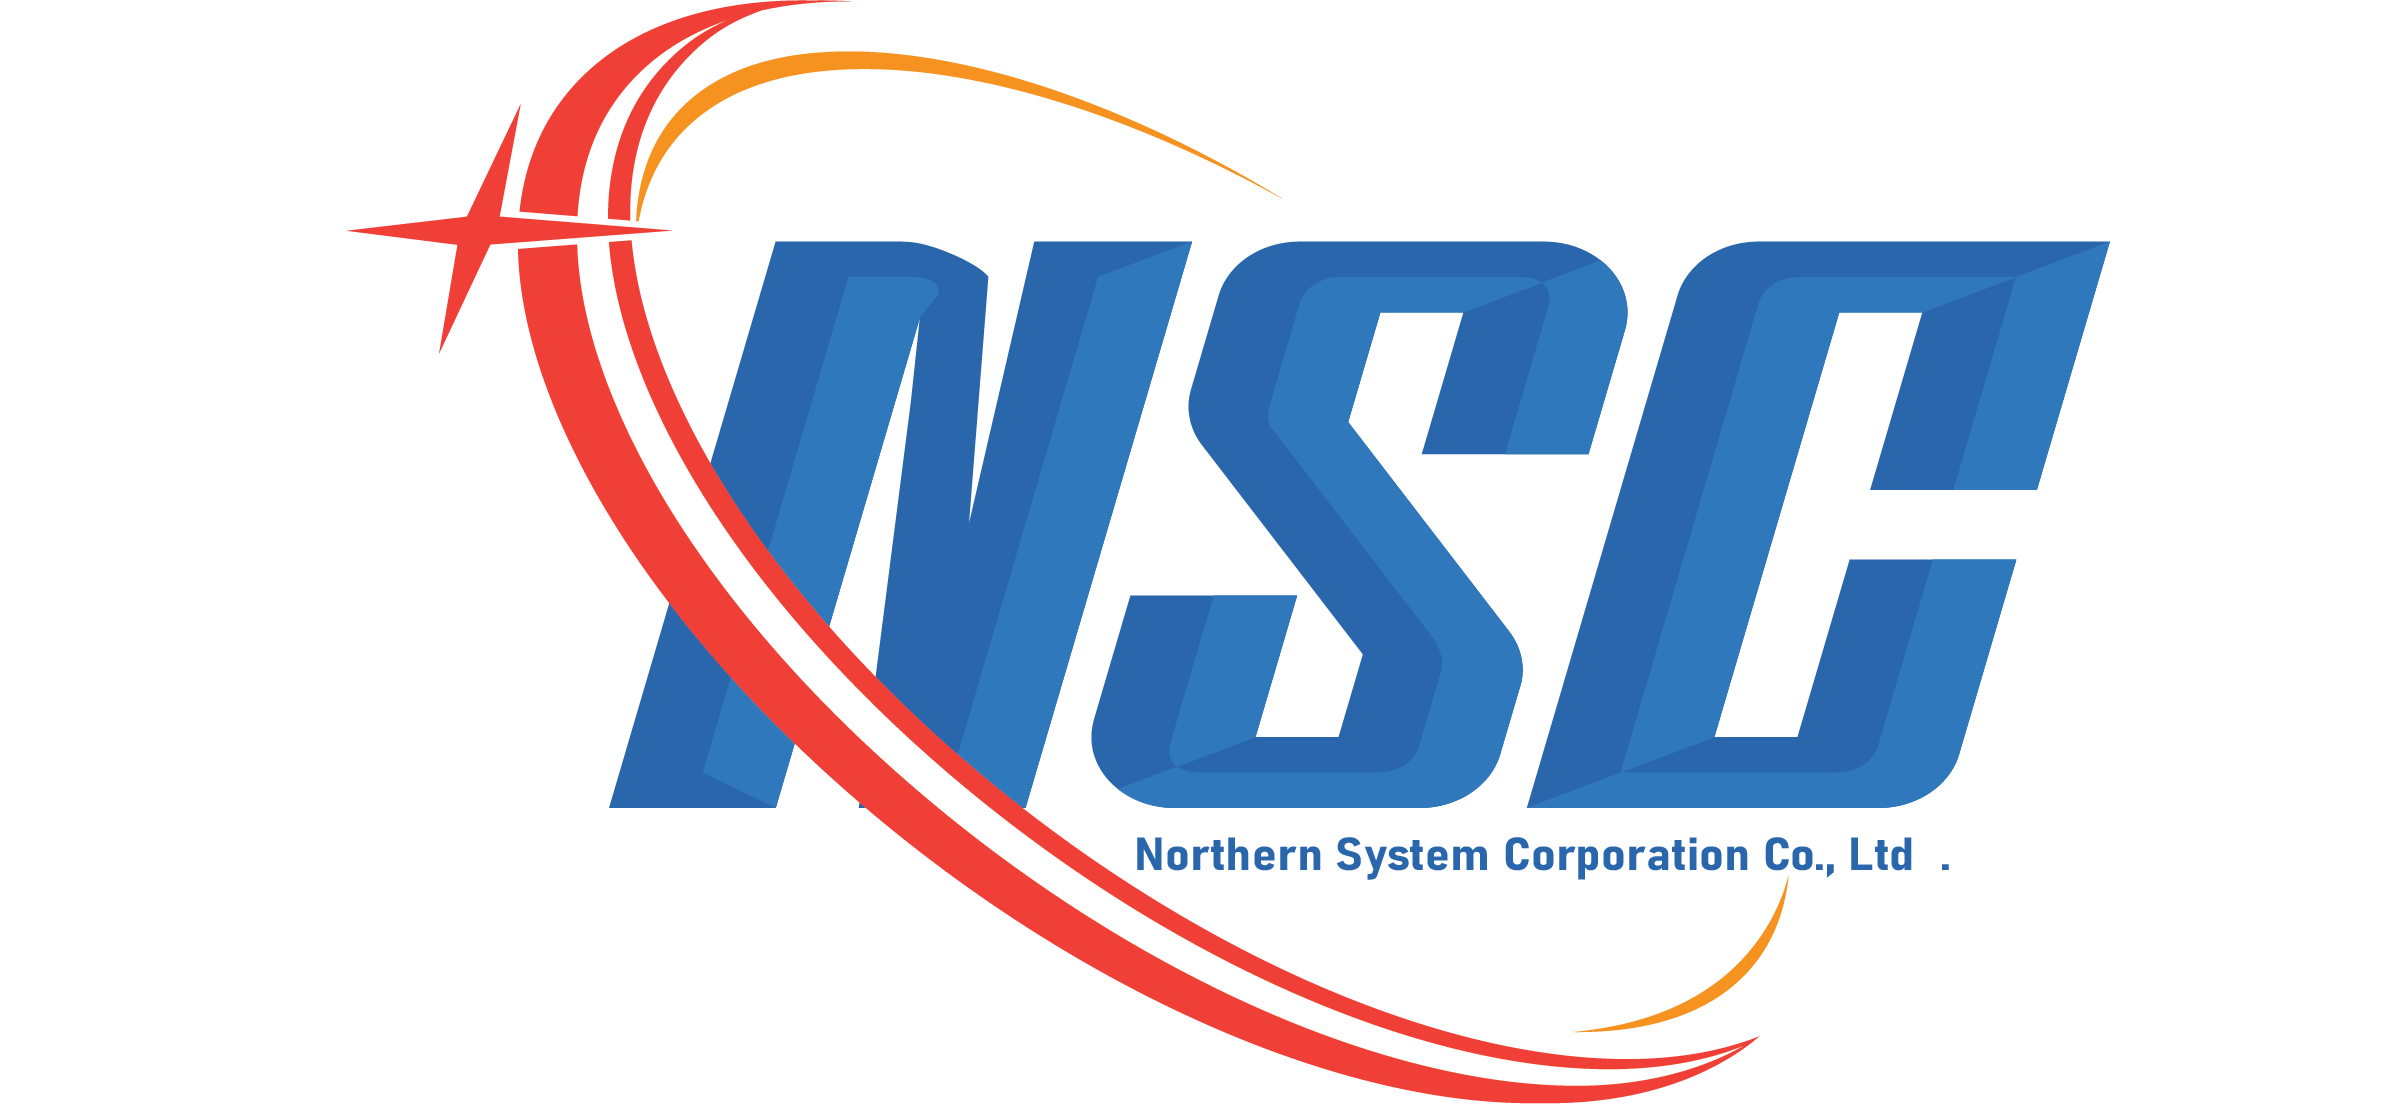 NORTHERN SYSTEM CORPERATION COMPANY LIMITED